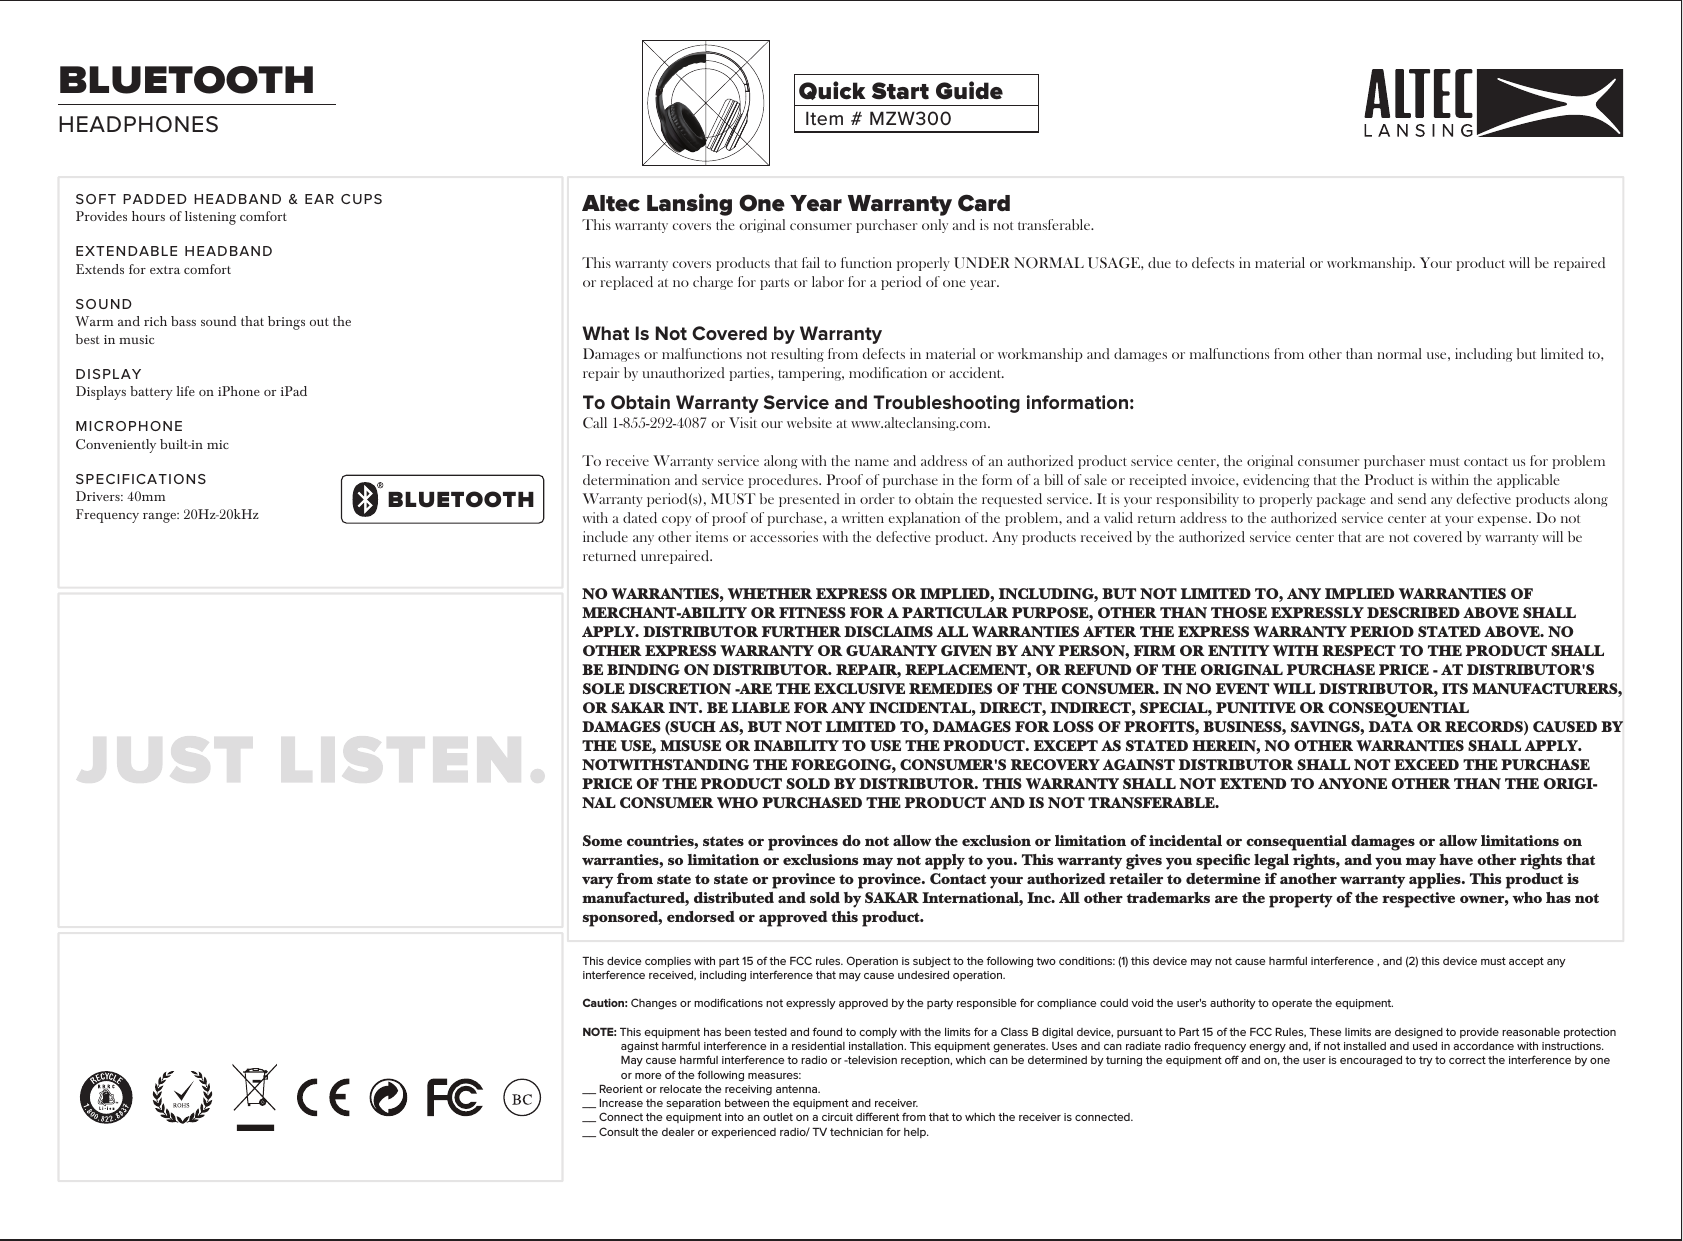 Altec Lansing One Year Warranty CardThis warranty covers the original consumer purchaser only and is not transferable.This warranty covers products that fail to function properly UNDER NORMAL USAGE, due to defects in material or workmanship. Your product will be repaired or replaced at no charge for parts or labor for a period of one year.What Is Not Covered by WarrantyDamages or malfunctions not resulting from defects in material or workmanship and damages or malfunctions from other than normal use, including but limited to, repair by unauthorized parties, tampering, modification or accident.To Obtain Warranty Service and Troubleshooting information:Call 1-855-292-4087 or Visit our website at www.alteclansing.com.To receive Warranty service along with the name and address of an authorized product service center, the original consumer purchaser must contact us for problem determination and service procedures. Proof of purchase in the form of a bill of sale or receipted invoice, evidencing that the Product is within the applicable Warranty period(s), MUST be presented in order to obtain the requested service. It is your responsibility to properly package and send any defective products along with a dated copy of proof of purchase, a written explanation of the problem, and a valid return address to the authorized service center at your expense. Do not include any other items or accessories with the defective product. Any products received by the authorized service center that are not covered by warranty will be returned unrepaired.NO WARRANTIES, WHETHER EXPRESS OR IMPLIED, INCLUDING, BUT NOT LIMITED TO, ANY IMPLIED WARRANTIES OF MERCHANT-ABILITY OR FITNESS FOR A PARTICULAR PURPOSE, OTHER THAN THOSE EXPRESSLY DESCRIBED ABOVE SHALL APPLY. DISTRIBUTOR FURTHER DISCLAIMS ALL WARRANTIES AFTER THE EXPRESS WARRANTY PERIOD STATED ABOVE. NO OTHER EXPRESS WARRANTY OR GUARANTY GIVEN BY ANY PERSON, FIRM OR ENTITY WITH RESPECT TO THE PRODUCT SHALL BE BINDING ON DISTRIBUTOR. REPAIR, REPLACEMENT, OR REFUND OF THE ORIGINAL PURCHASE PRICE - AT DISTRIBUTOR&apos;S SOLE DISCRETION -ARE THE EXCLUSIVE REMEDIES OF THE CONSUMER. IN NO EVENT WILL DISTRIBUTOR, ITS MANUFACTURERS, OR SAKAR INT. BE LIABLE FOR ANY INCIDENTAL, DIRECT, INDIRECT, SPECIAL, PUNITIVE OR CONSEQUENTIALDAMAGES (SUCH AS, BUT NOT LIMITED TO, DAMAGES FOR LOSS OF PROFITS, BUSINESS, SAVINGS, DATA OR RECORDS) CAUSED BYTHE USE, MISUSE OR INABILITY TO USE THE PRODUCT. EXCEPT AS STATED HEREIN, NO OTHER WARRANTIES SHALL APPLY. NOTWITHSTANDING THE FOREGOING, CONSUMER&apos;S RECOVERY AGAINST DISTRIBUTOR SHALL NOT EXCEED THE PURCHASE PRICE OF THE PRODUCT SOLD BY DISTRIBUTOR. THIS WARRANTY SHALL NOT EXTEND TO ANYONE OTHER THAN THE ORIGI-NAL CONSUMER WHO PURCHASED THE PRODUCT AND IS NOT TRANSFERABLE.Some countries, states or provinces do not allow the exclusion or limitation of incidental or consequential damages or allow limitations on warranties, so limitation or exclusions may not apply to you. This warranty gives you specic legal rights, and you may have other rights that vary from state to state or province to province. Contact your authorized retailer to determine if another warranty applies. This product is manufactured, distributed and sold by SAKAR International, Inc. All other trademarks are the property of the respective owner, who has not sponsored, endorsed or approved this product.This device complies with part 15 of the FCC rules. Operation is subject to the following two conditions: (1) this device may not cause harmful interference , and (2) this device must accept any interference received, including interference that may cause undesired operation. Caution: Changes or modiﬁcations not expressly approved by the party responsible for compliance could void the user&apos;s authority to operate the equipment.NOTE: This equipment has been tested and found to comply with the limits for a Class B digital device, pursuant to Part 15 of the FCC Rules, These limits are designed to provide reasonable protection against harmful interference in a residential installation. This equipment generates. Uses and can radiate radio frequency energy and, if not installed and used in accordance with instructions. May cause harmful interference to radio or -television reception, which can be determined by turning the equipment o and on, the user is encouraged to try to correct the interference by one or more of the following measures:__ Reorient or relocate the receiving antenna.__ Increase the separation between the equipment and receiver.__ Connect the equipment into an outlet on a circuit dierent from that to which the receiver is connected.__ Consult the dealer or experienced radio/ TV technician for help.HEADPHONESBLUETOOTHItem # MZW300Quick Start GuideSOFT PADDED HEADBAND &amp; EAR CUPSProvides hours of listening comfortEXTENDABLE HEADBANDExtends for extra comfortSOUNDWarm and rich bass sound that brings out thebest in musicDISPLAYDisplays battery life on iPhone or iPadMICROPHONEConveniently built-in micSPECIFICATIONSDrivers: 40mmFrequency range: 20Hz-20kHzBLUETOOTH